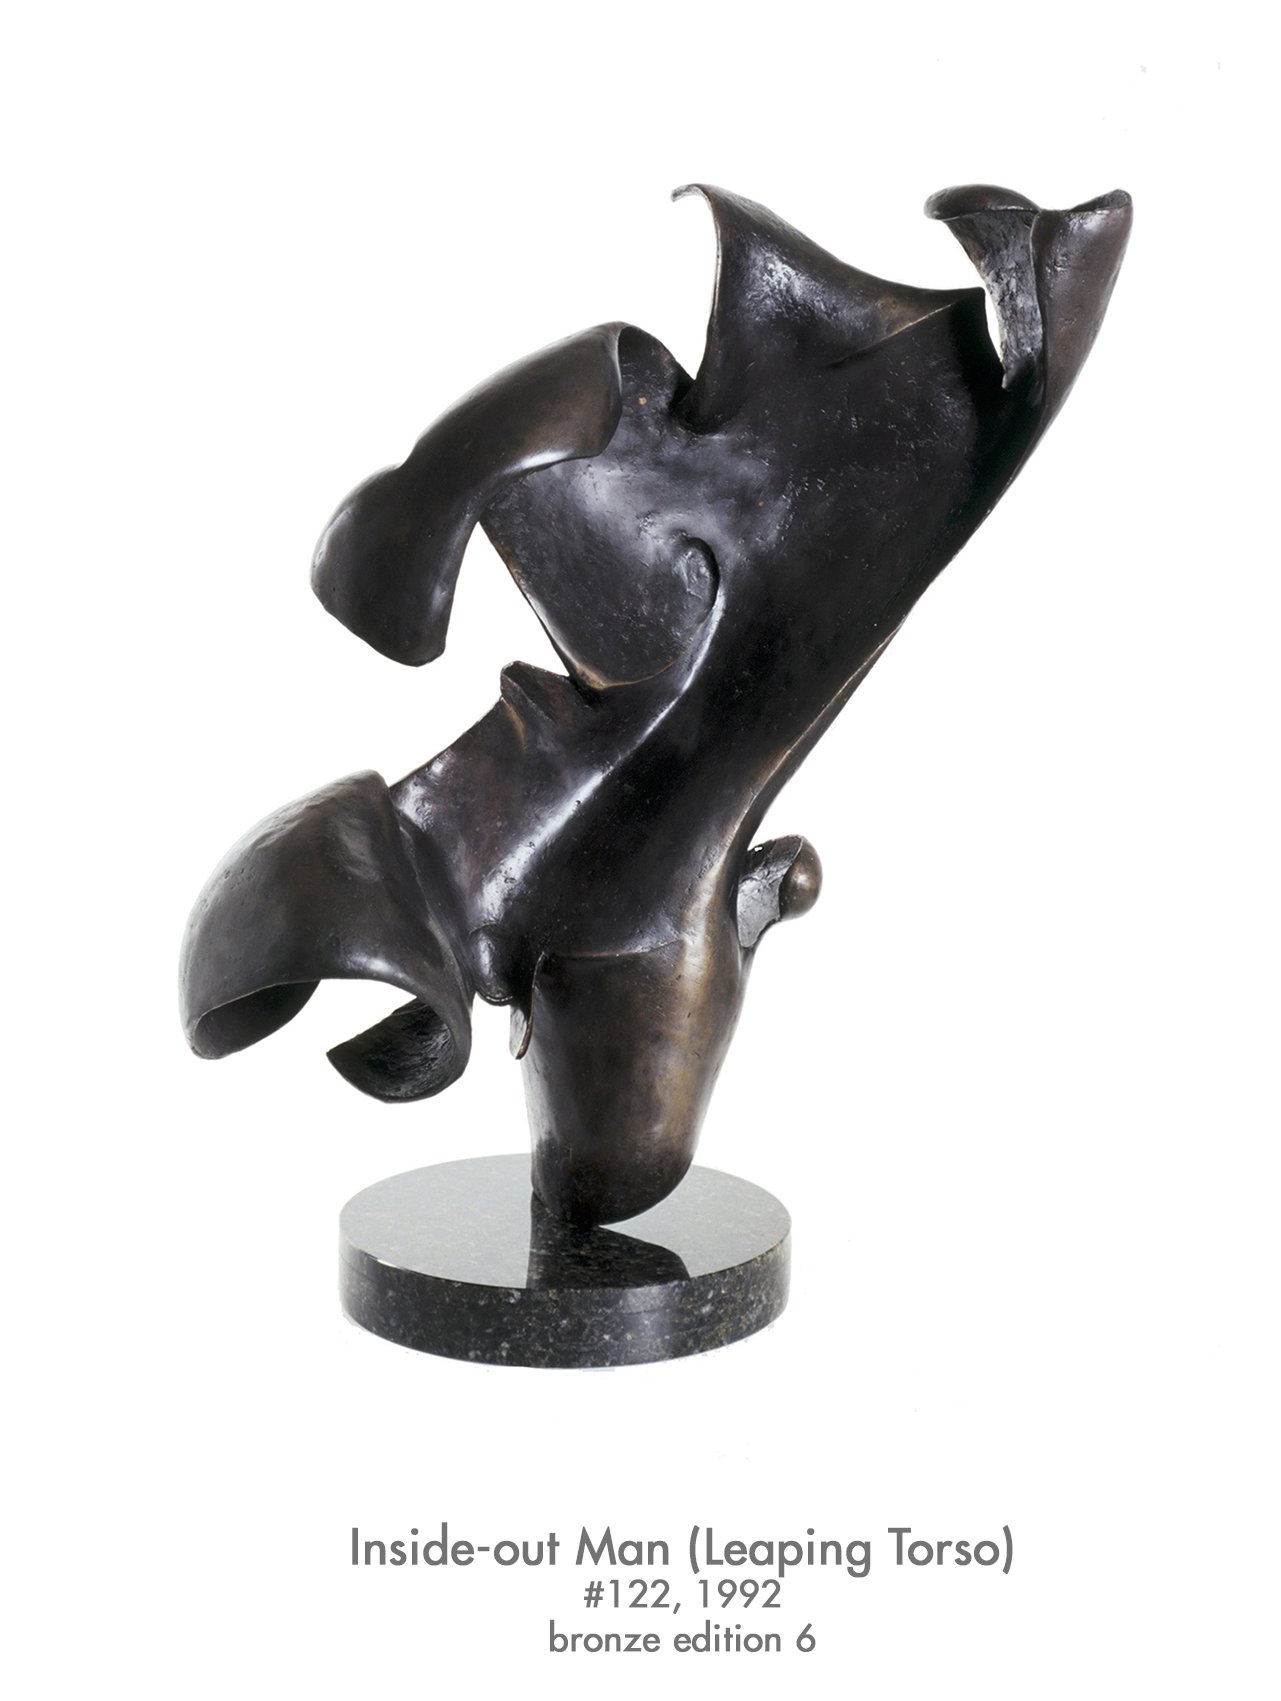 Inside-out Man (Leaping Torso), 1992, bronze, #122